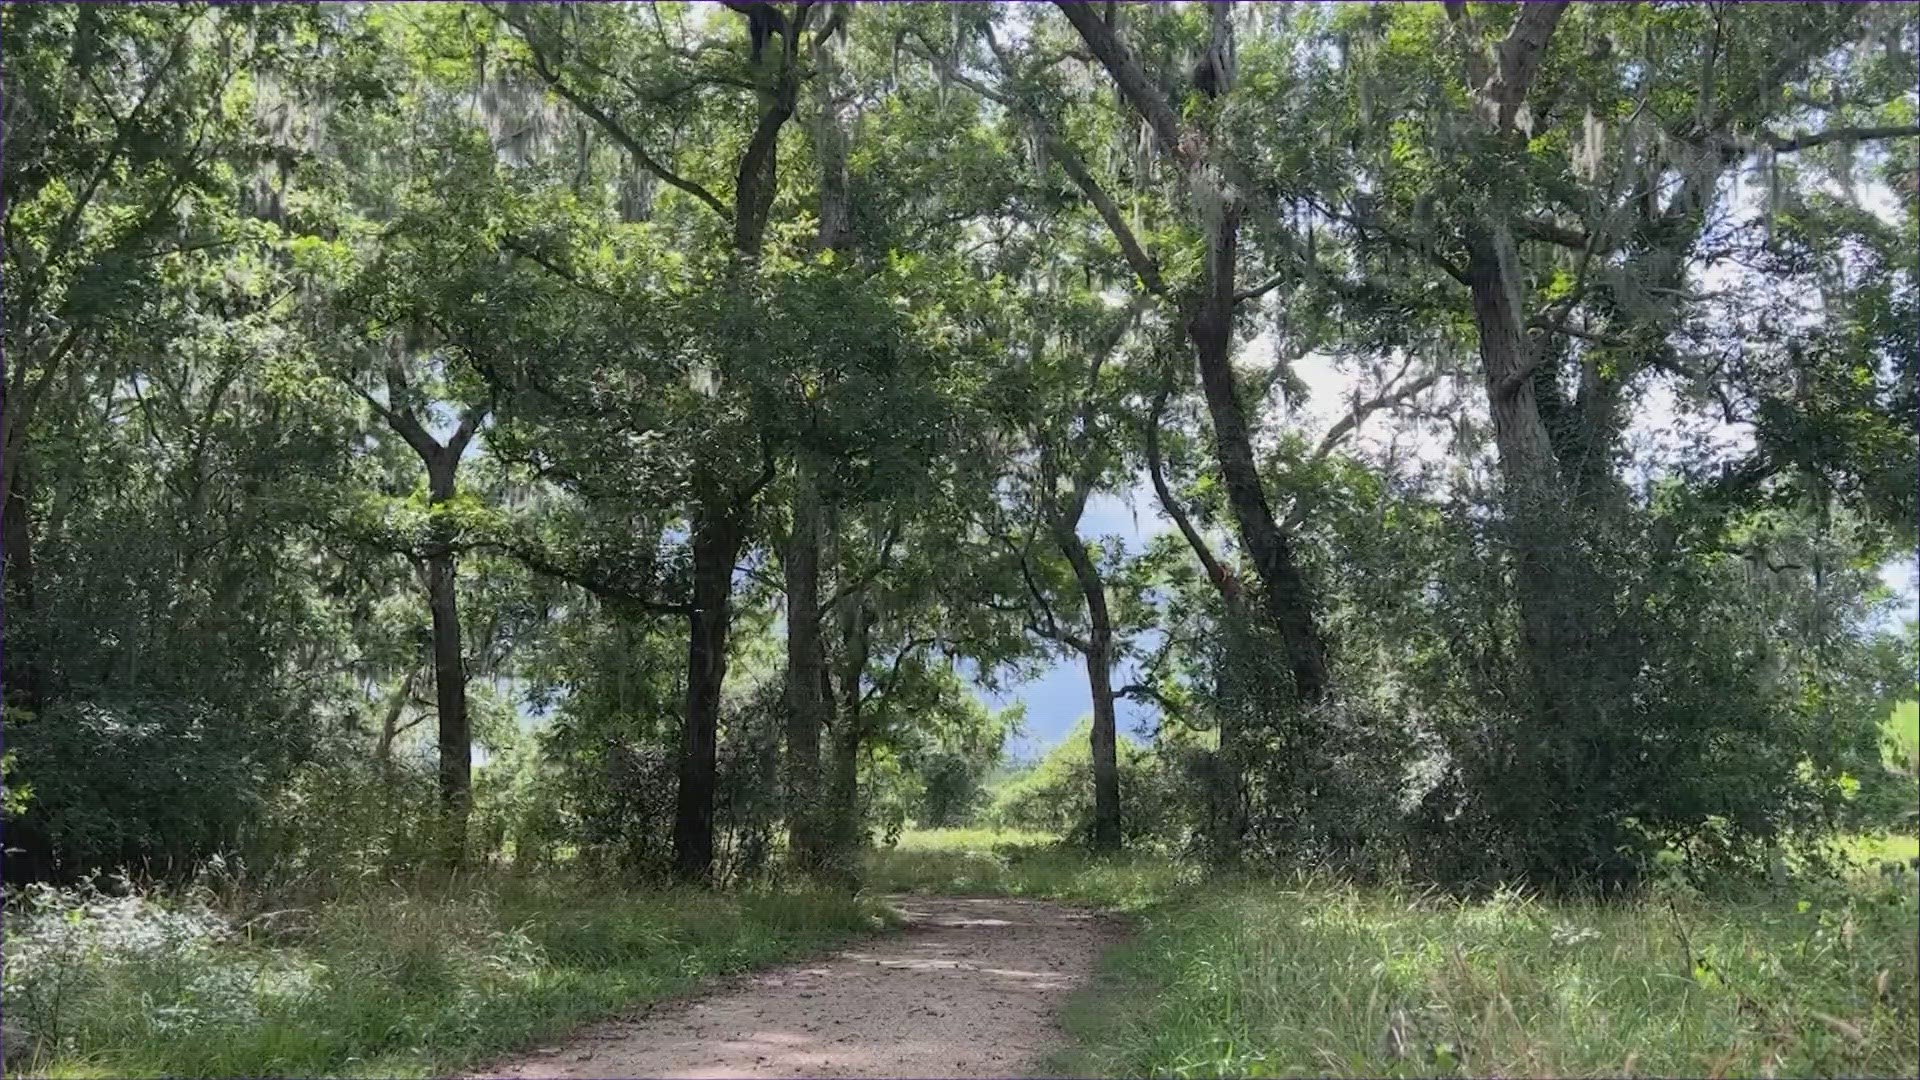 On Sunday (11/5), you can get into any Texas State Park for free. Texas has more than 80 parks. There are four across the Greater Houston area.